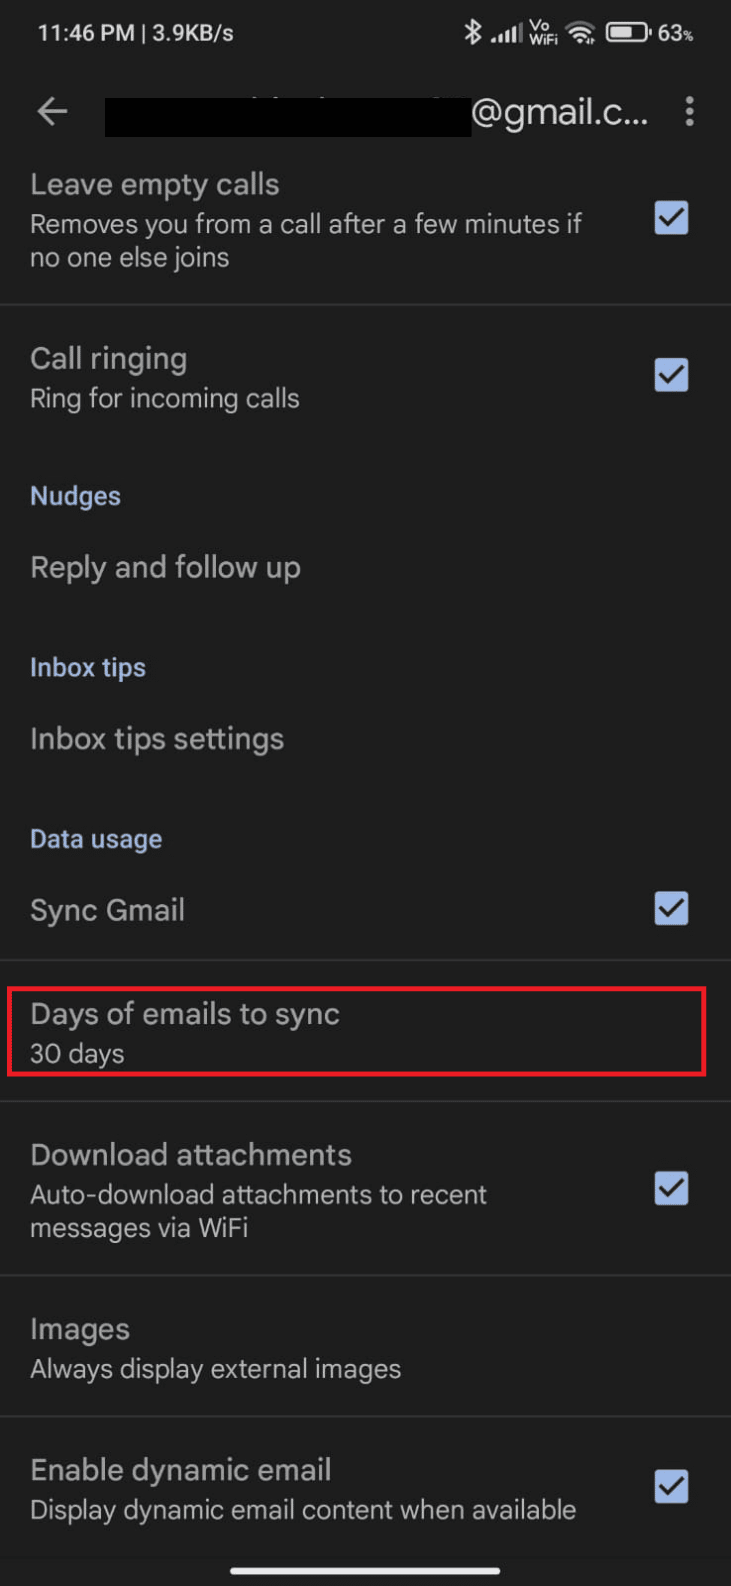 Now, scroll down the screen and tap on the Days of email to sync option.